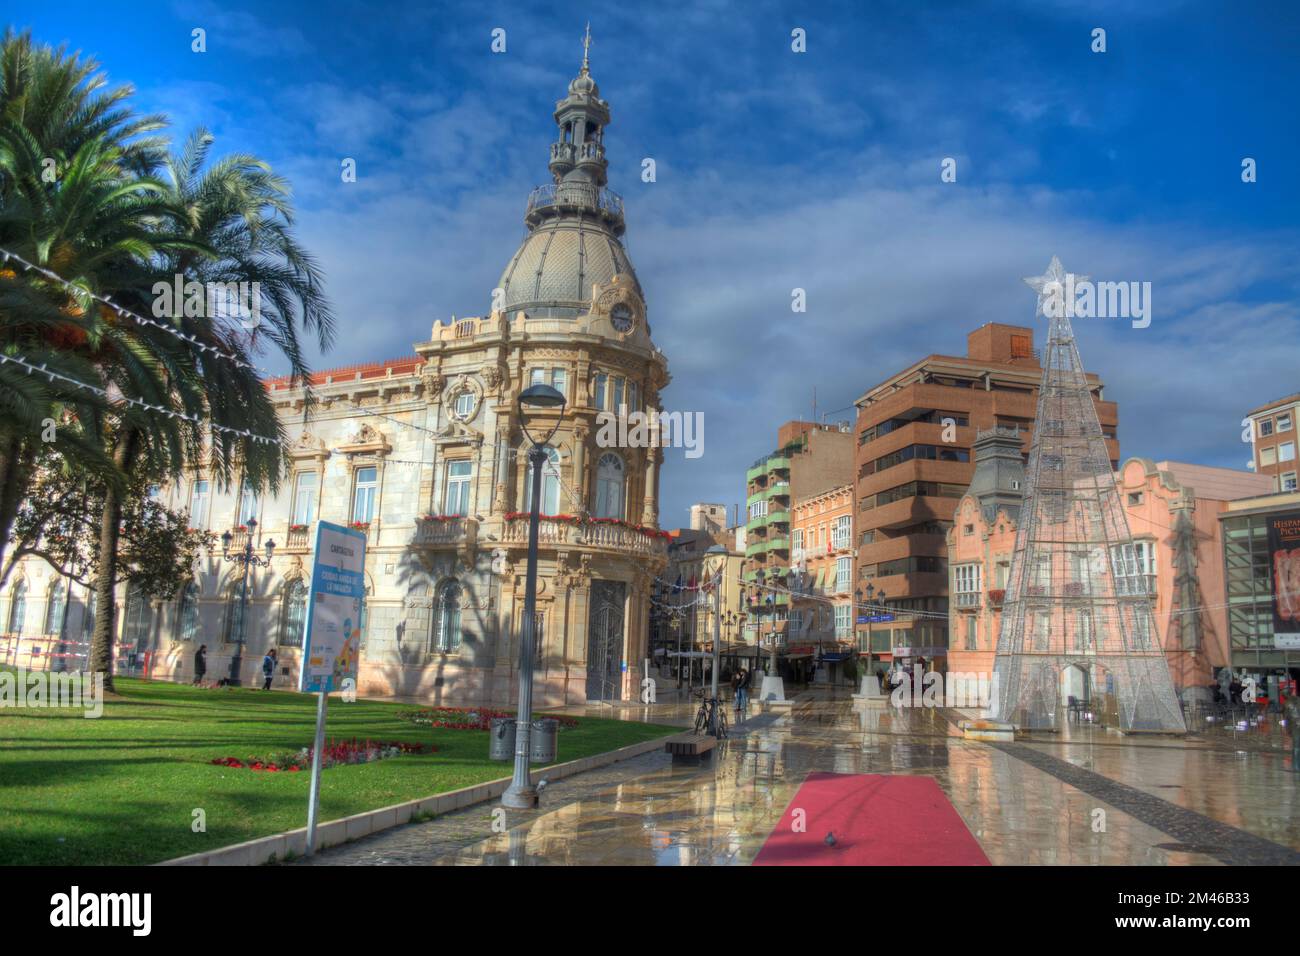 HDR of the City Hall in the city of Cartagena, Region of Murcia, South Eastern Spain, Europe Stock Photo